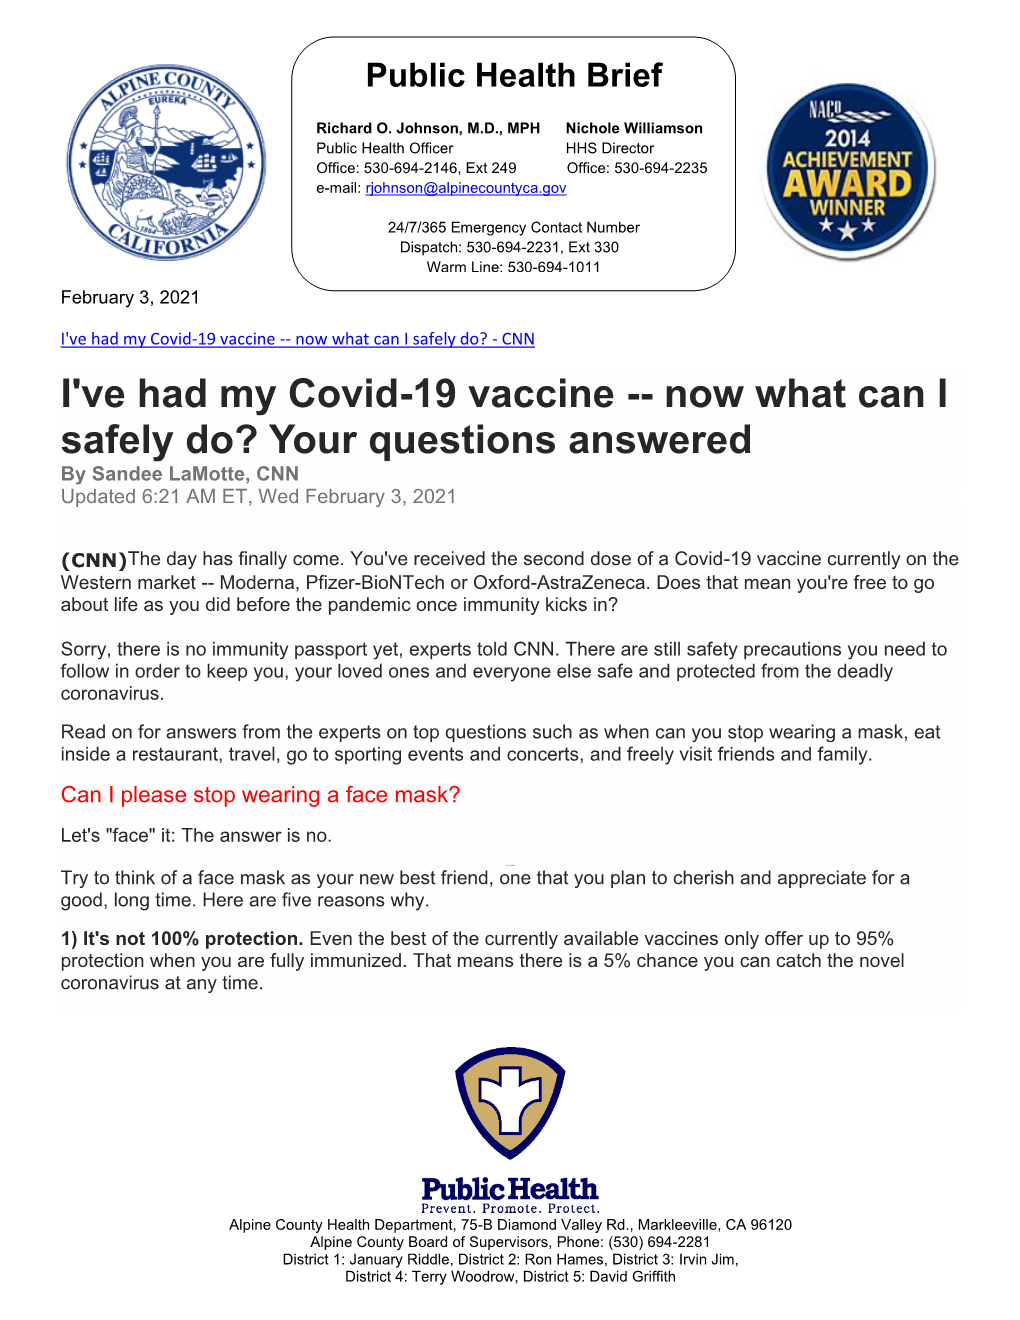 So, You Got Your Second Dose of COVID-19 Vaccine